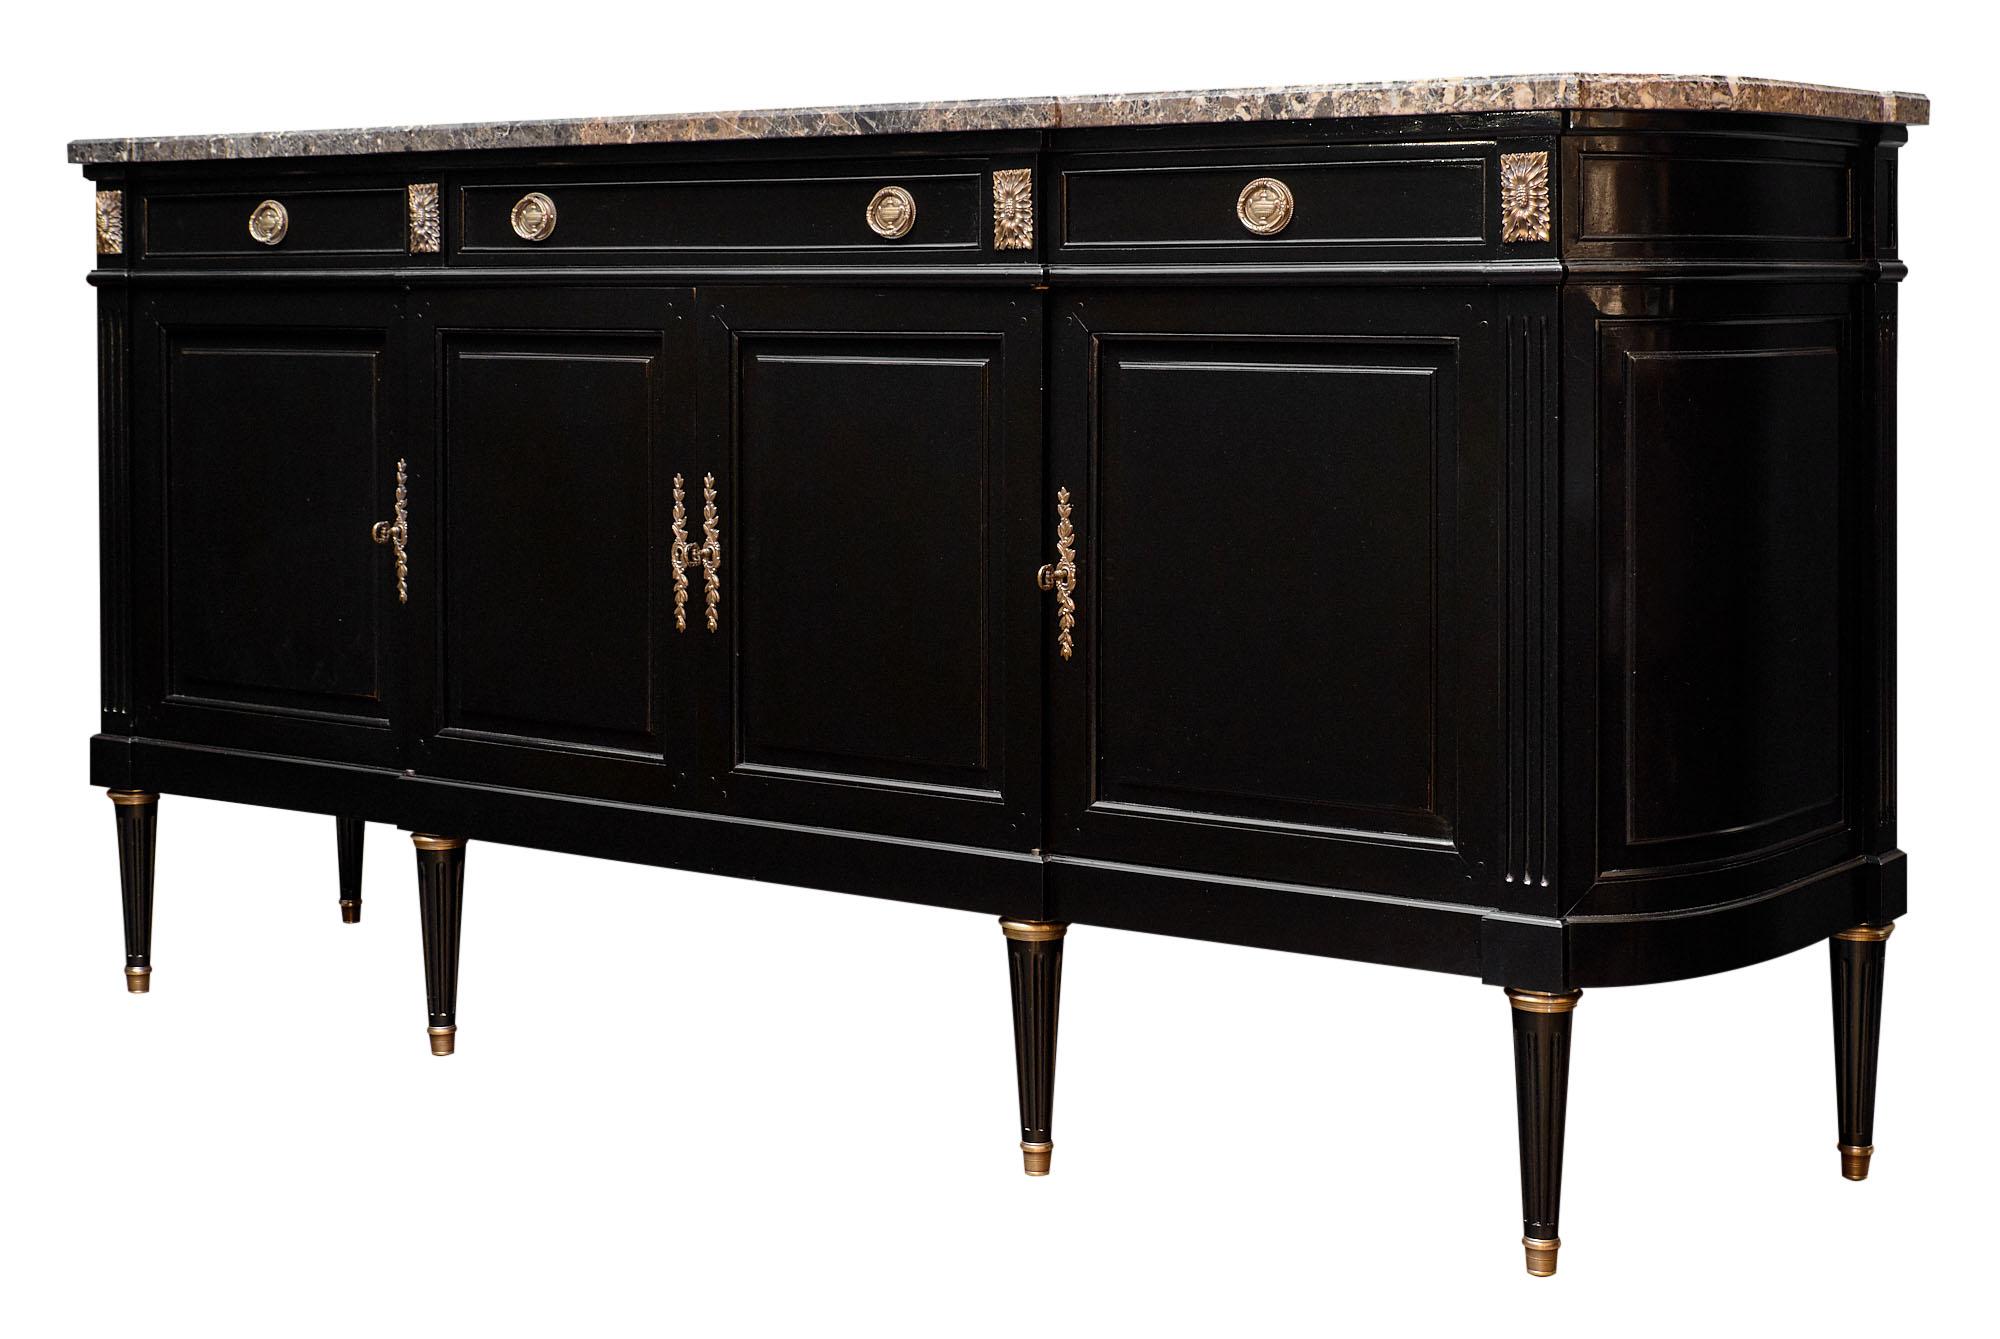 Louis XVI style French buffet with Saint Anne marble top. This important enfilade made of mahogany has its original marble intact, and features the perfect amount of gilt brass decor and hardware. We love the fluted details and French polish finish.